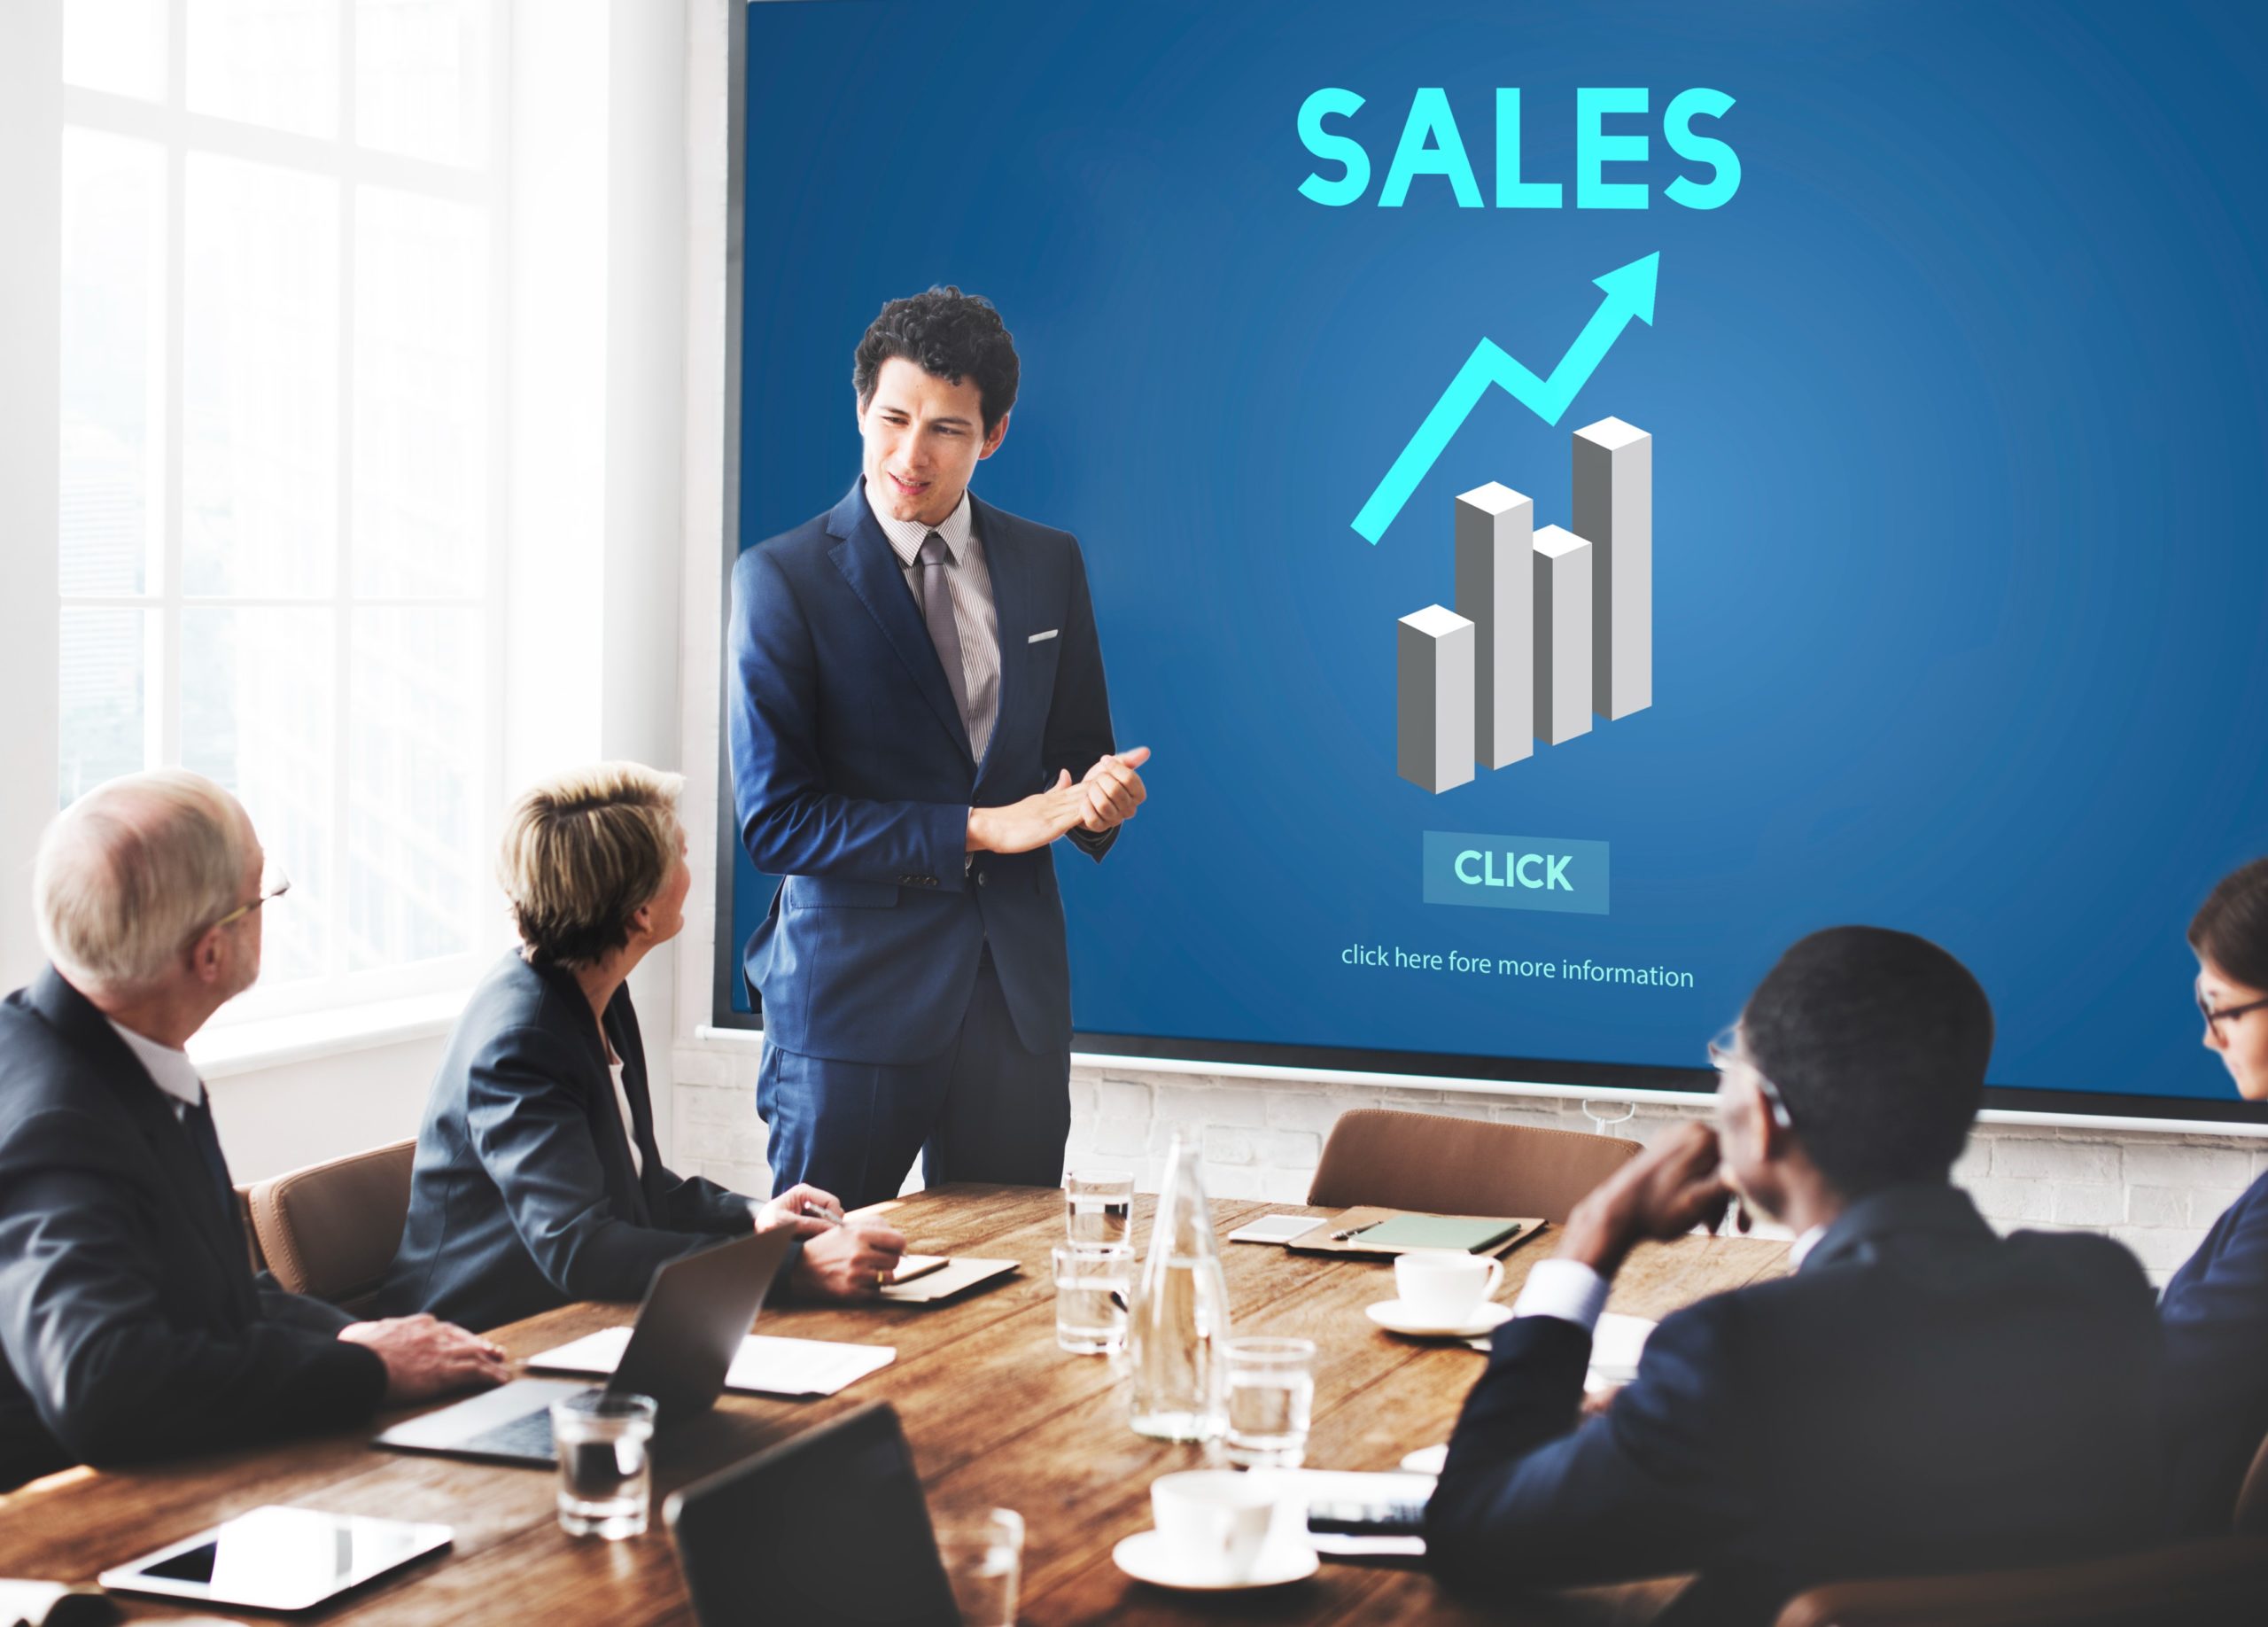 sales-sell-selling-commerce-costs-profit-retail-concept